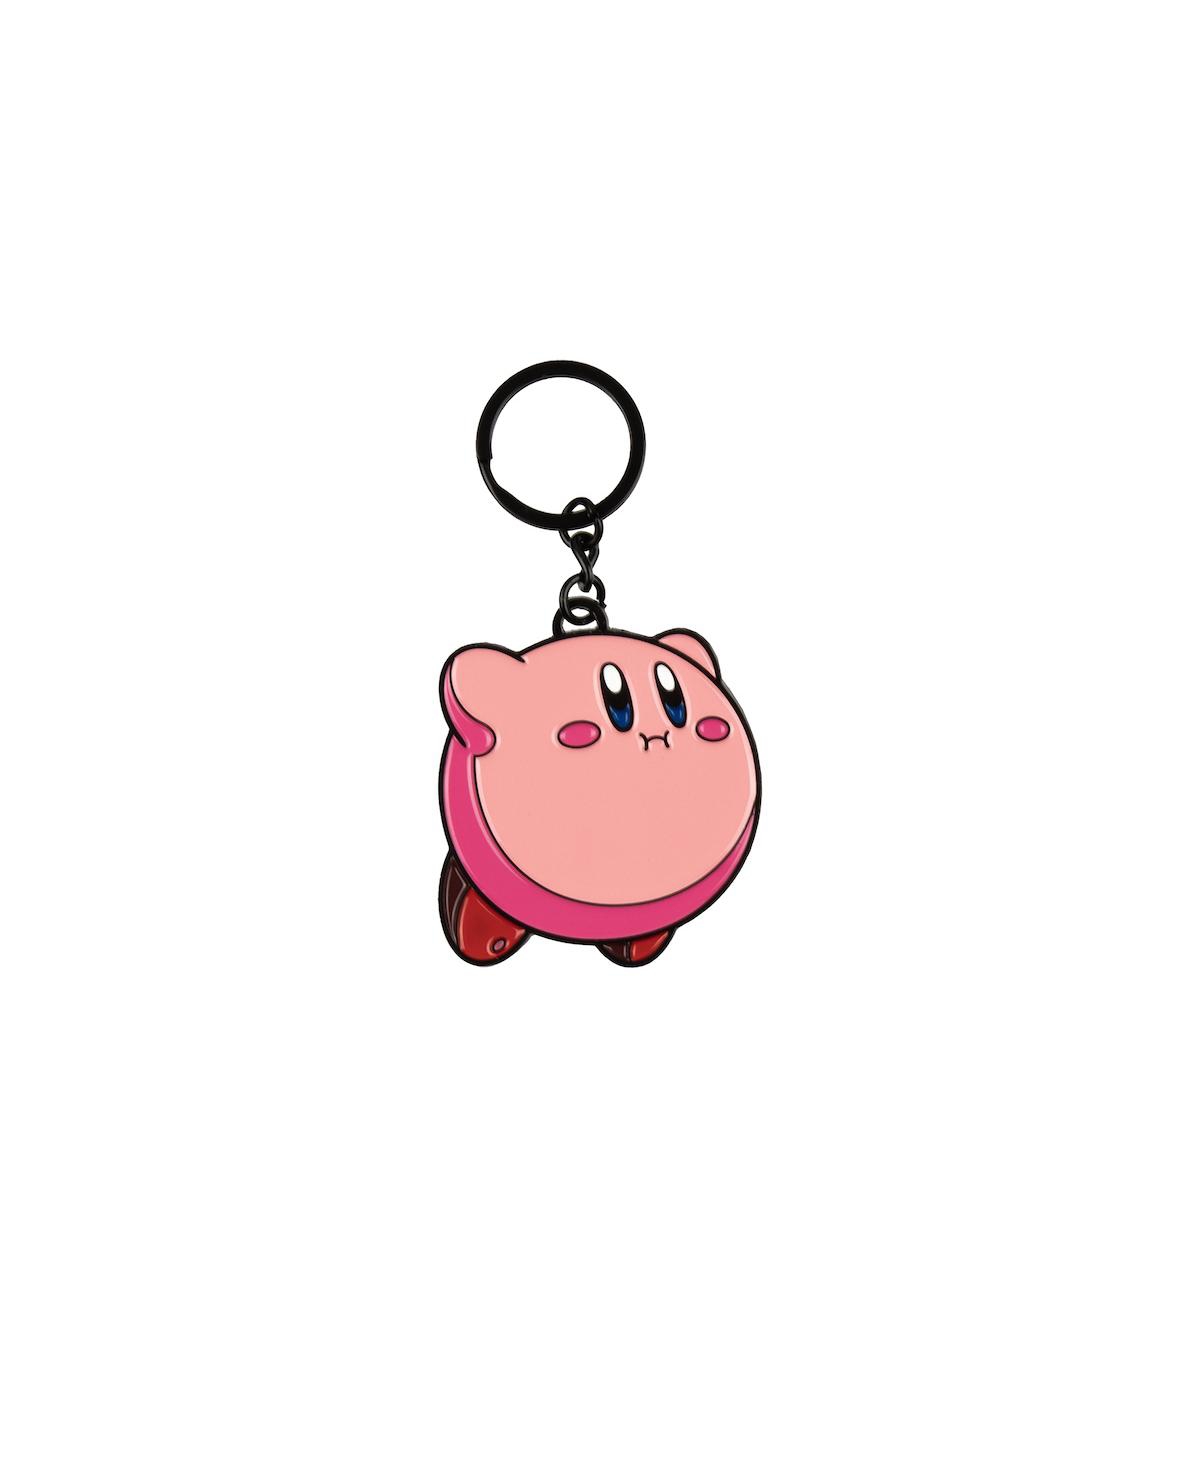 Keychain - Multicolored